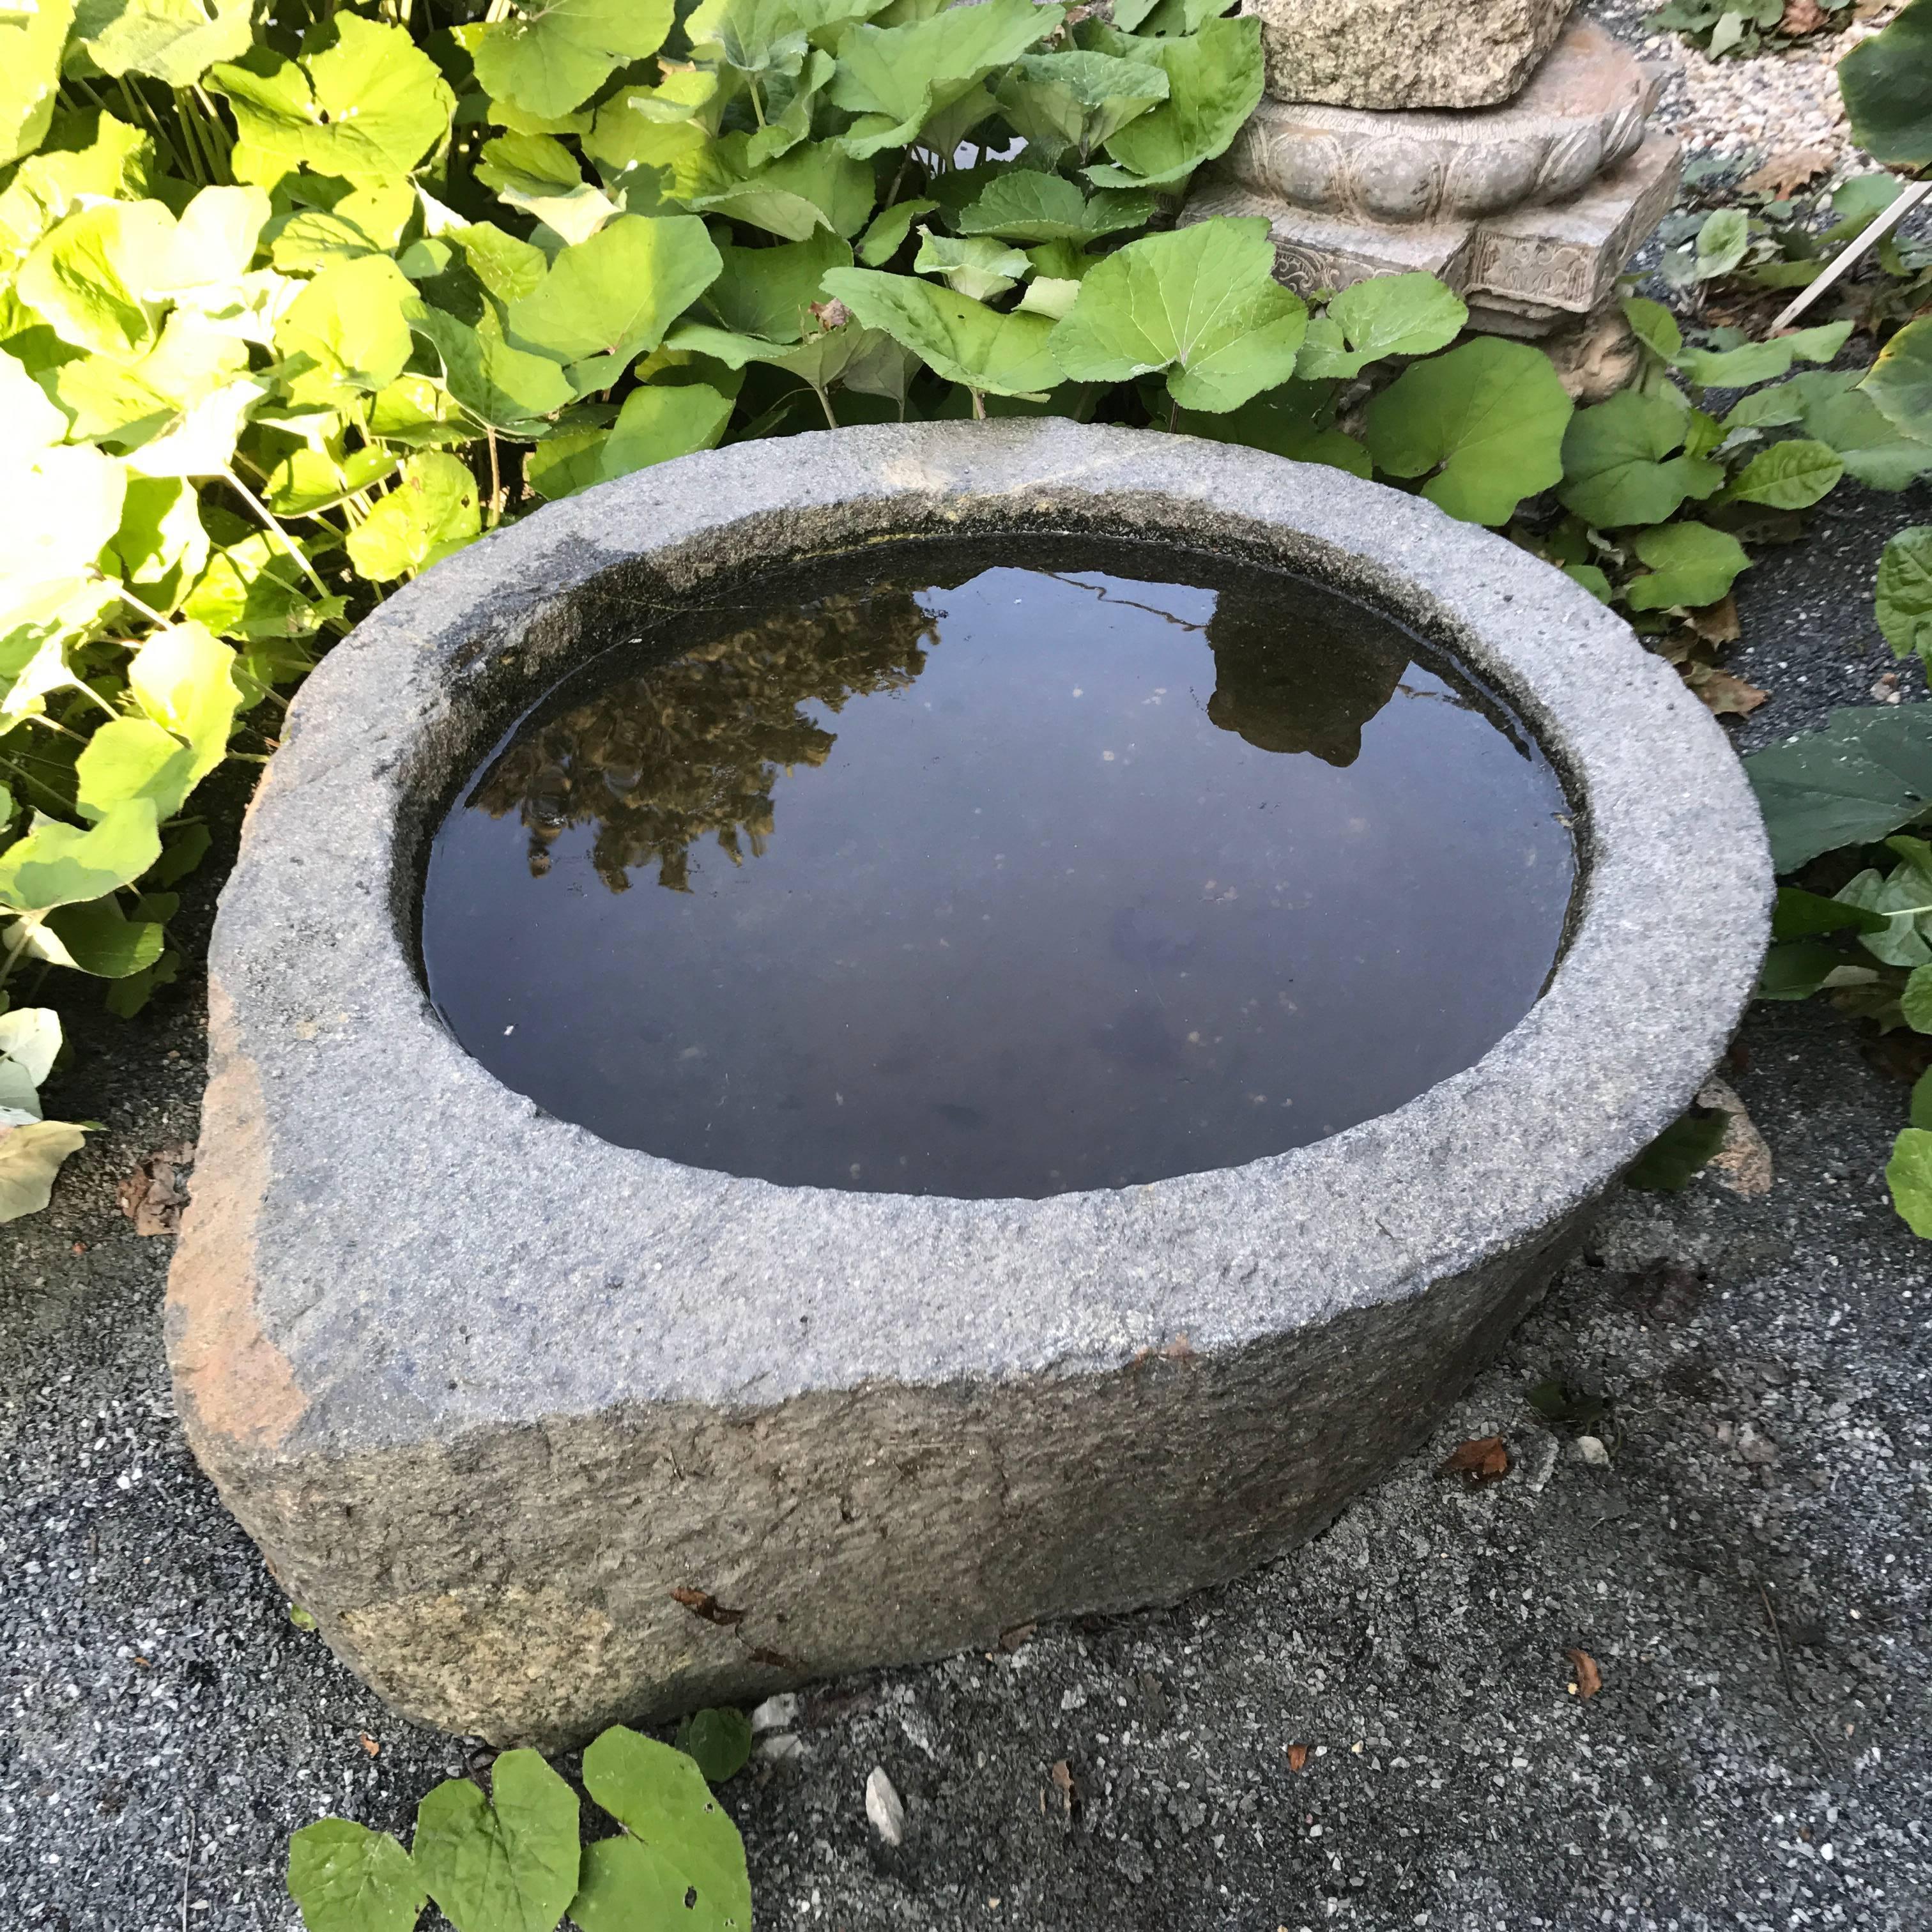 China, a visually attractive antique stone Tear Drop planter water basin hand-carved from solid limestone. At least 100 years old. 

Unique tear drop design. 

Dimensions: 10 inches tall and 32 inches diameter

Period: hand-carved in solid limestone